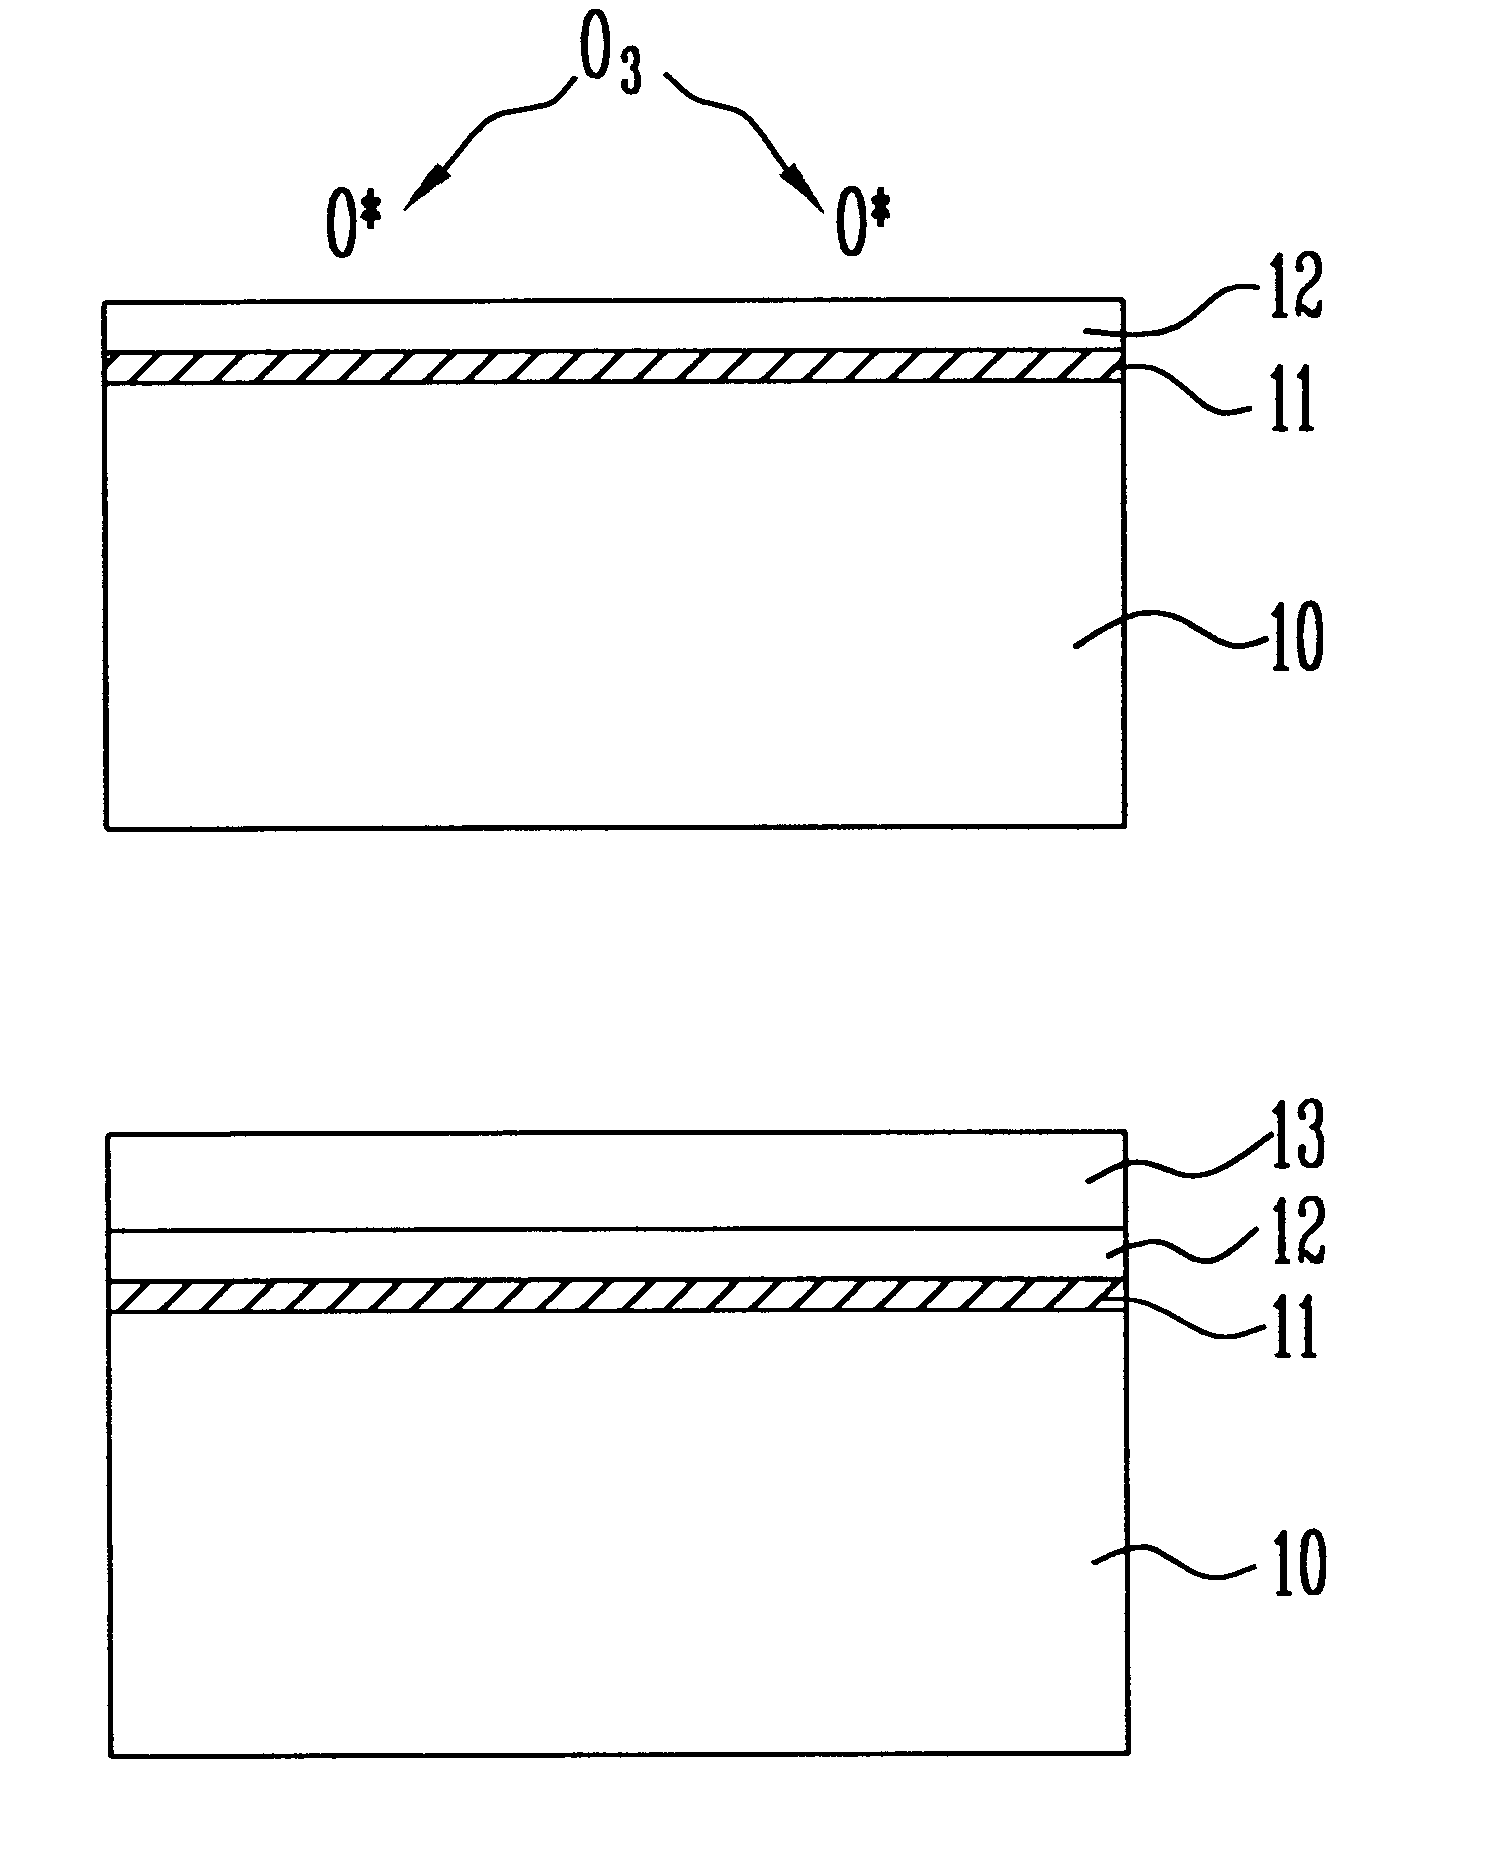 Method of manufacturing a capacitor in a semiconductor device using a high dielectric tantalum oxide or barium strontium titanate material that is treated in an ozone plasma